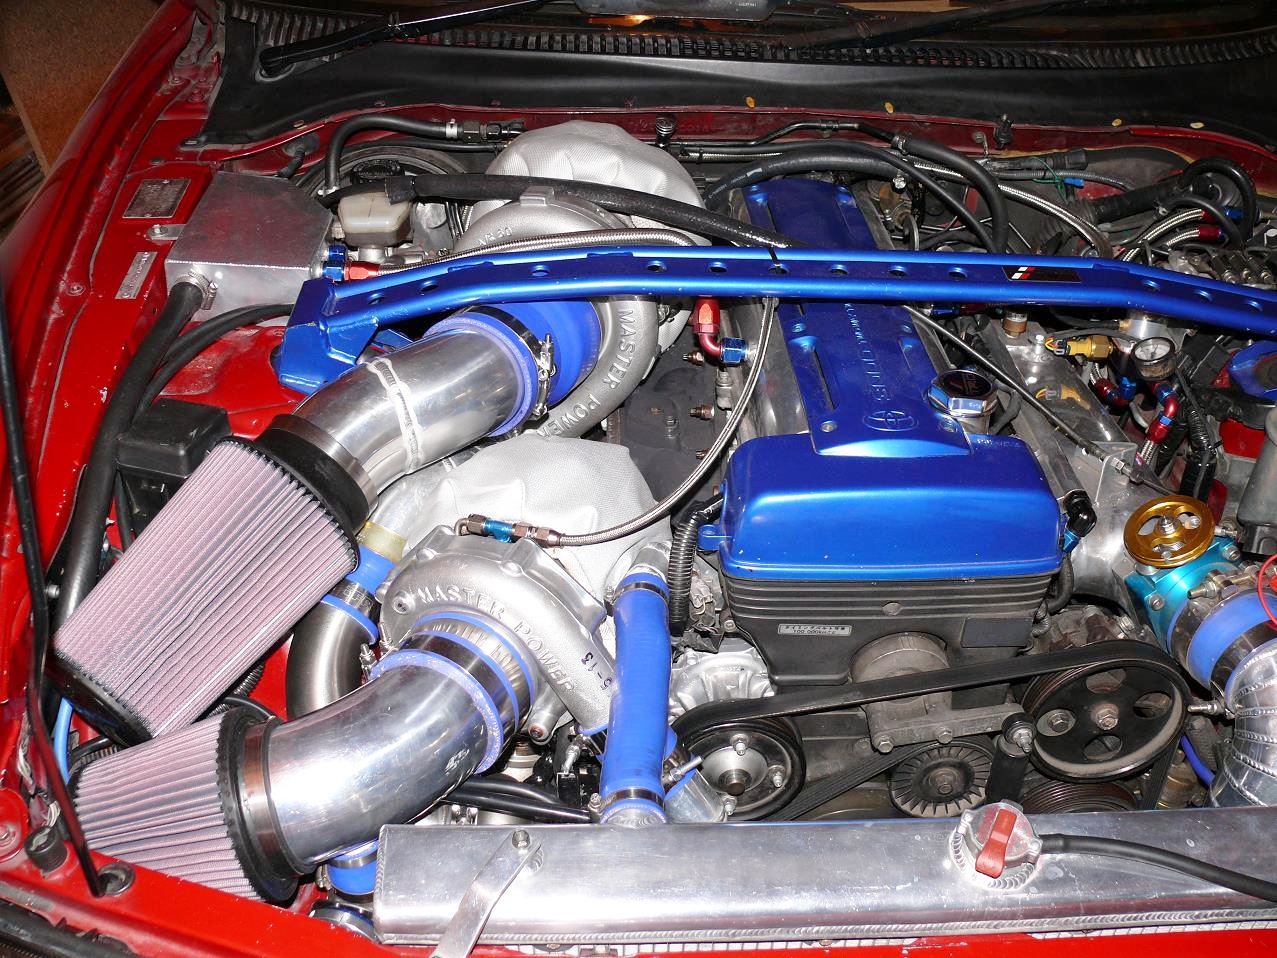 2jz sequential turbo